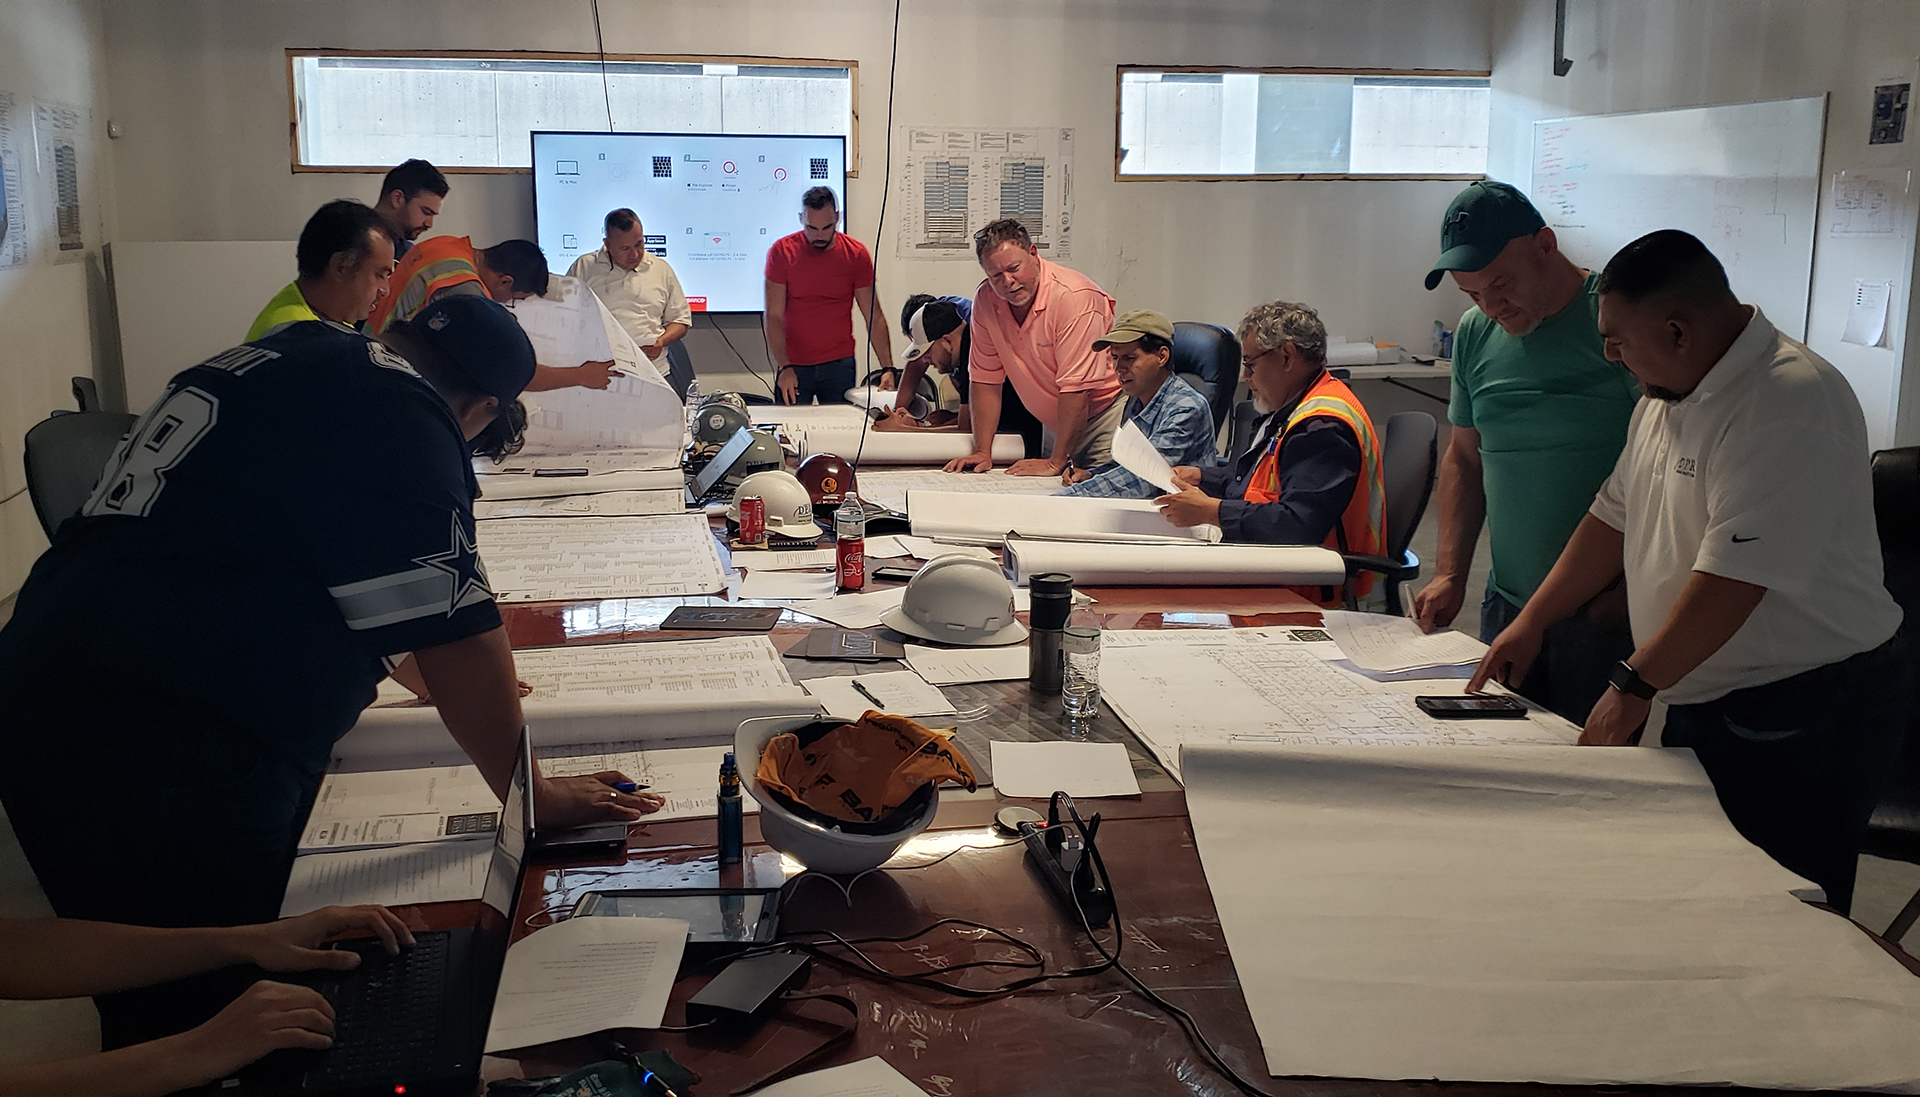 Participants in DPR’s apprenticeship program around a table reviewing construction drawings.